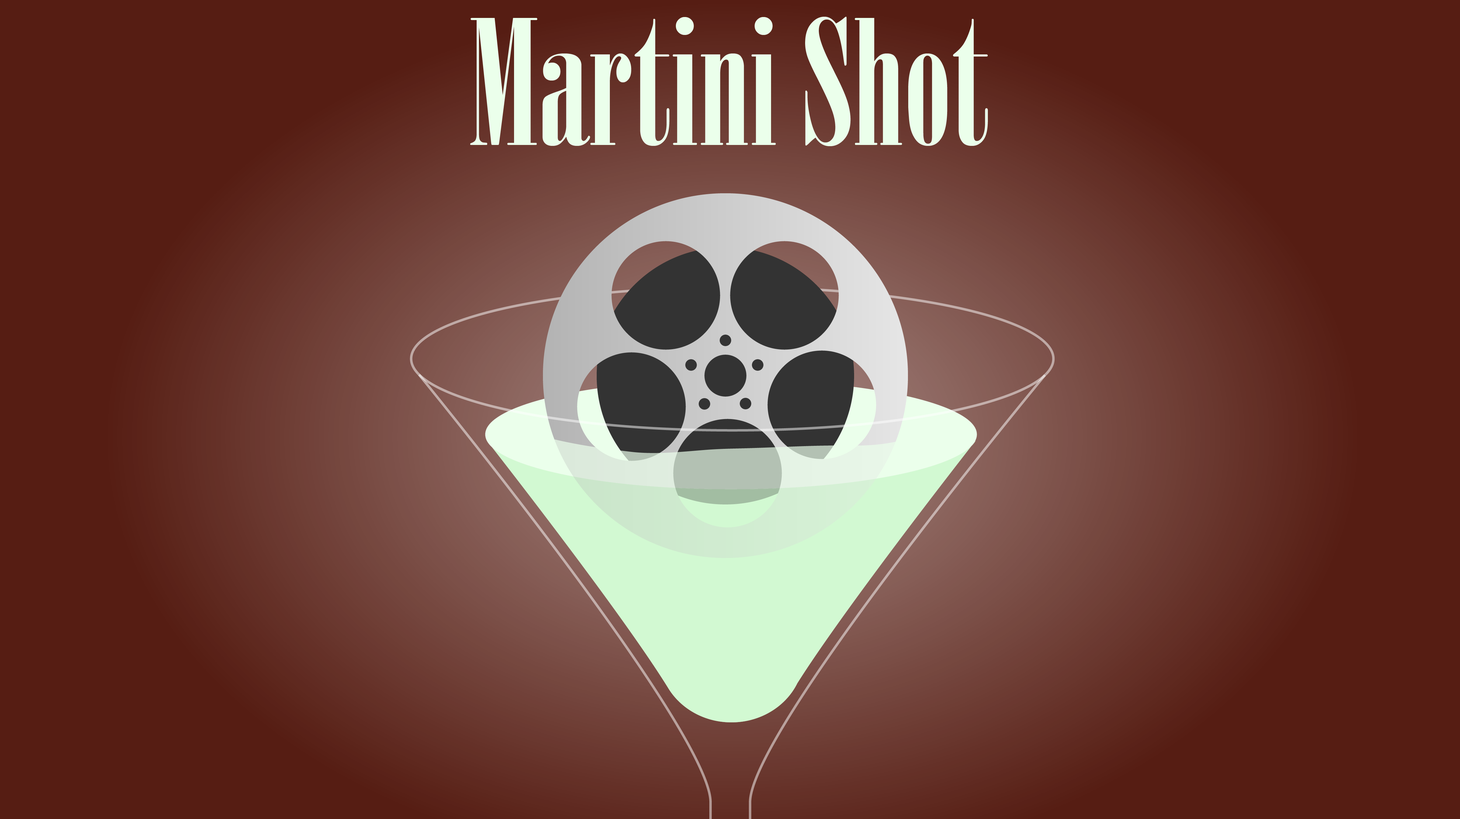 This is Rob Long and on today’s Martini Shot I predict that the most popular and sought after audience demographic is going to be old people, because once they figure out how to subscribe to Netflix or Hulu or whatever, they’re not going to want to…